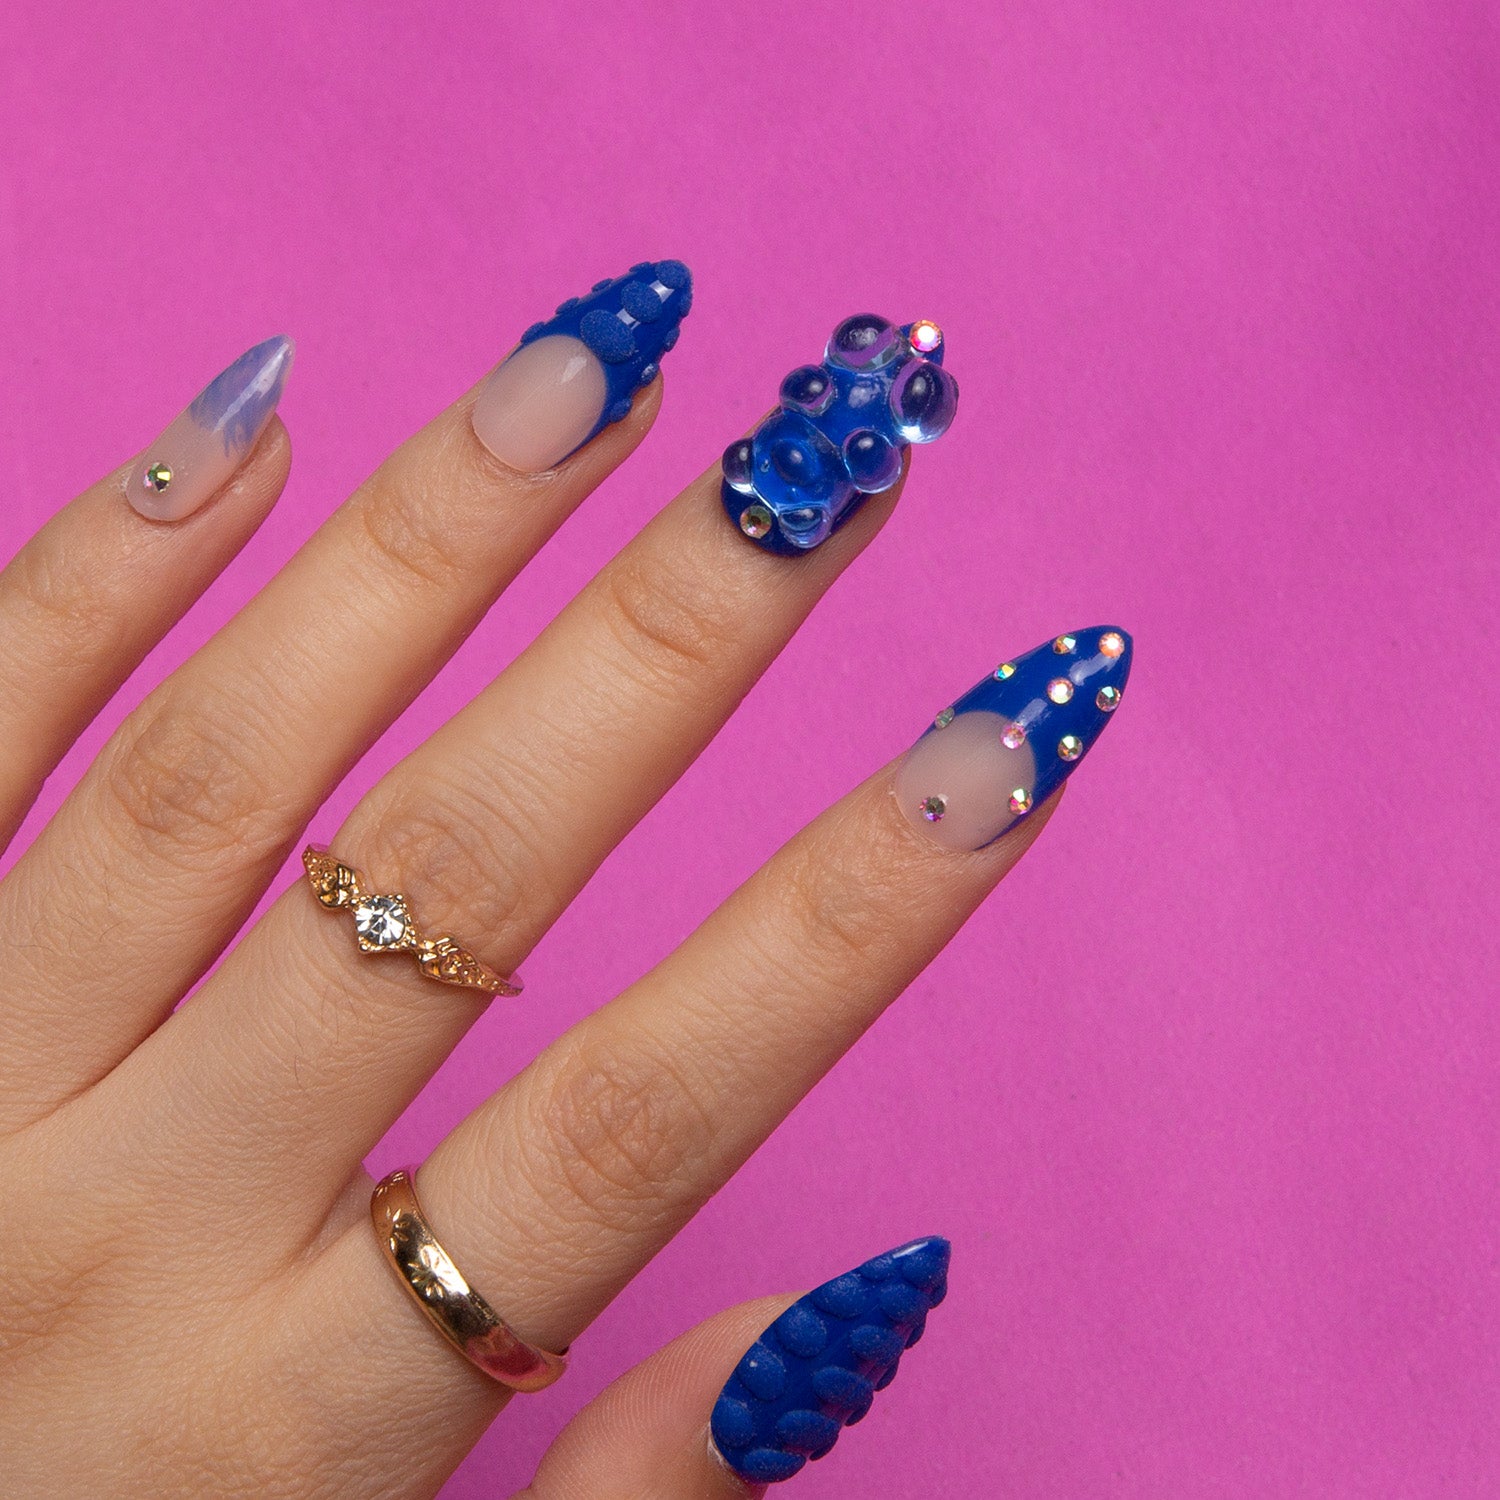 Hand with almond-shaped press-on nails featuring blue rhinestones, gummy bears, and 3D dots on a pink background, complemented by gold rings.